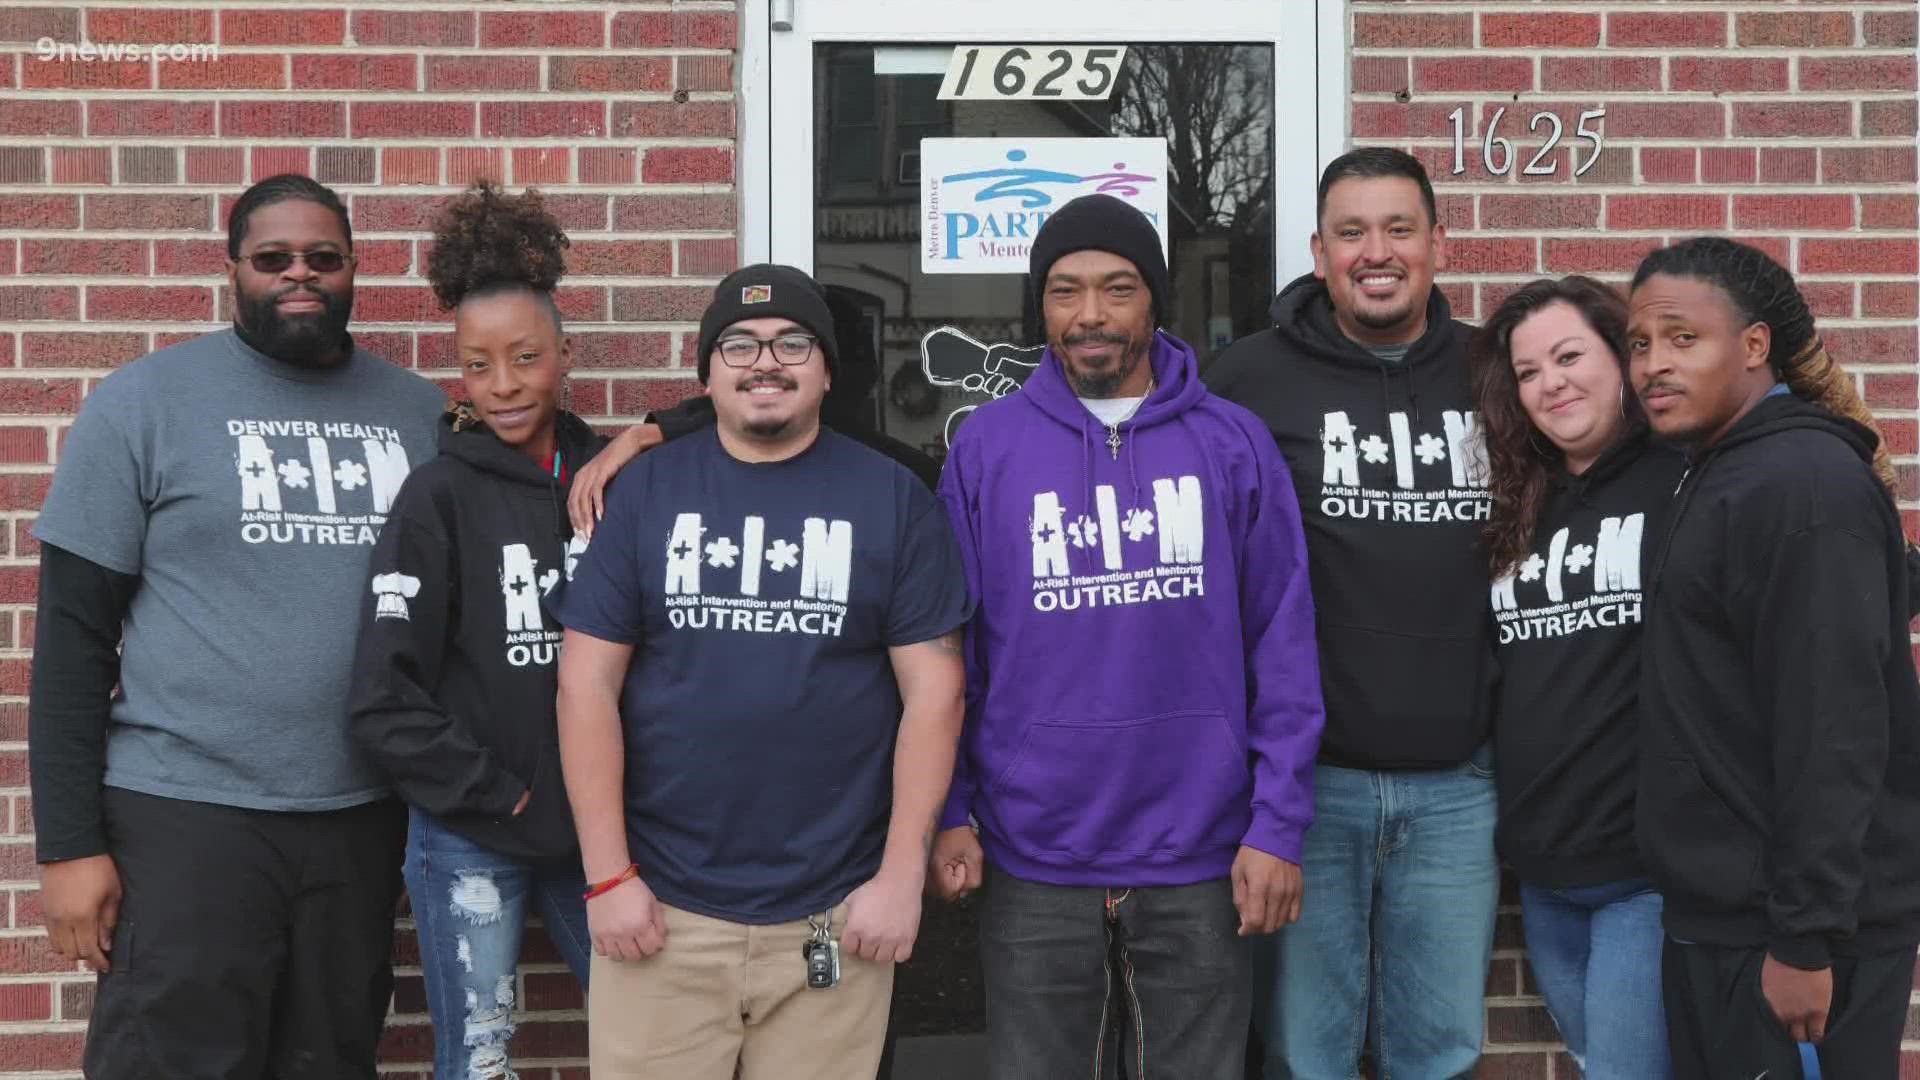 GRASP is an intervention program that works with youth who are at-risk of gang involvement. They'd like a new intervention specialist to continue their work.